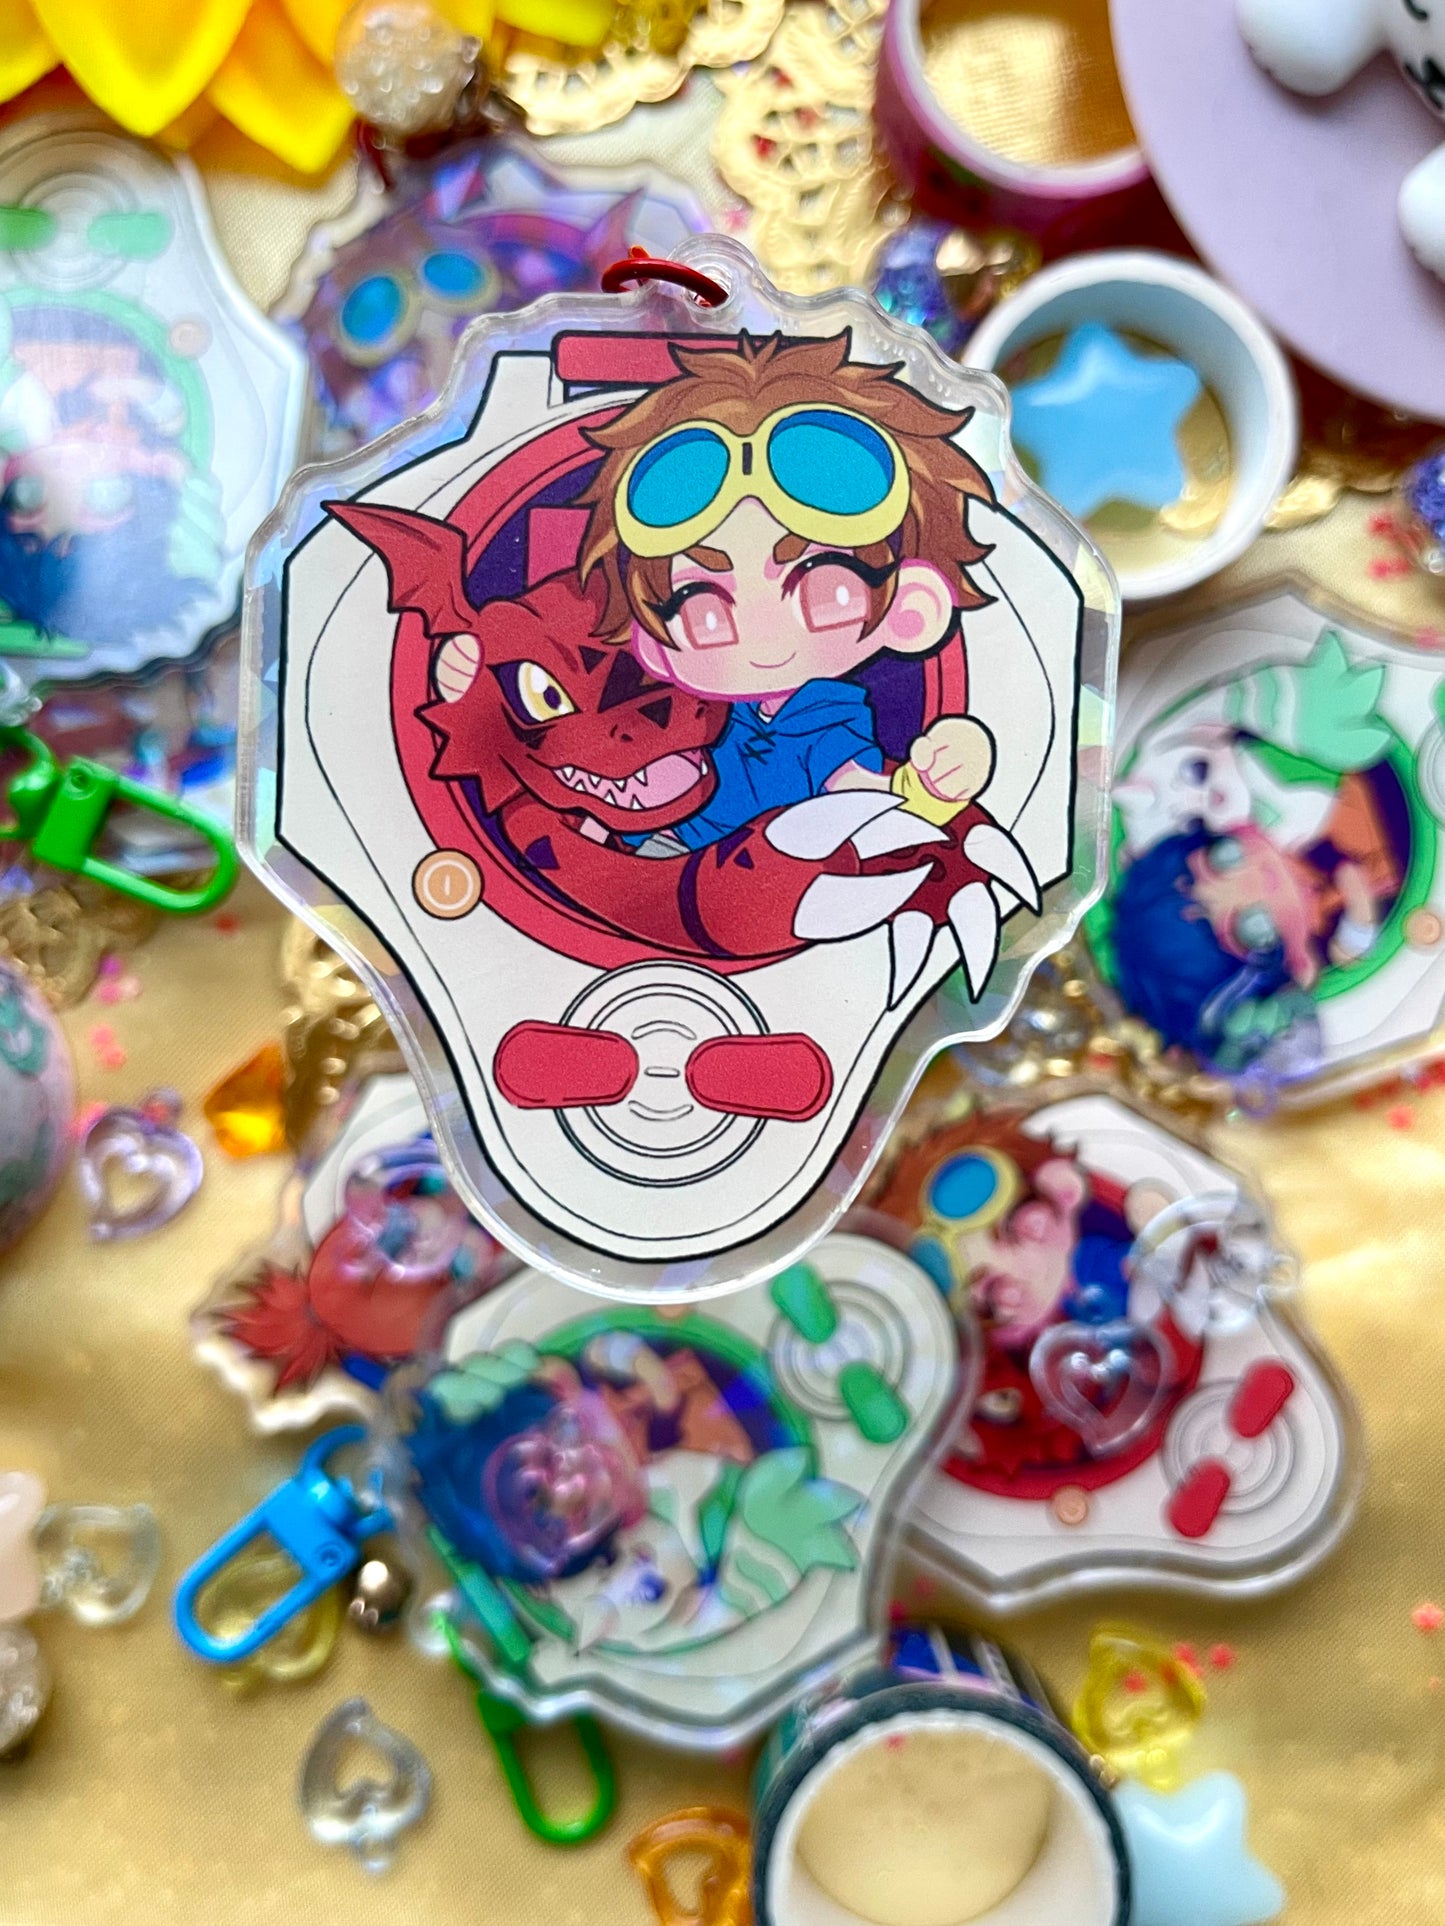 【KEYCHAINS】digimon tamers